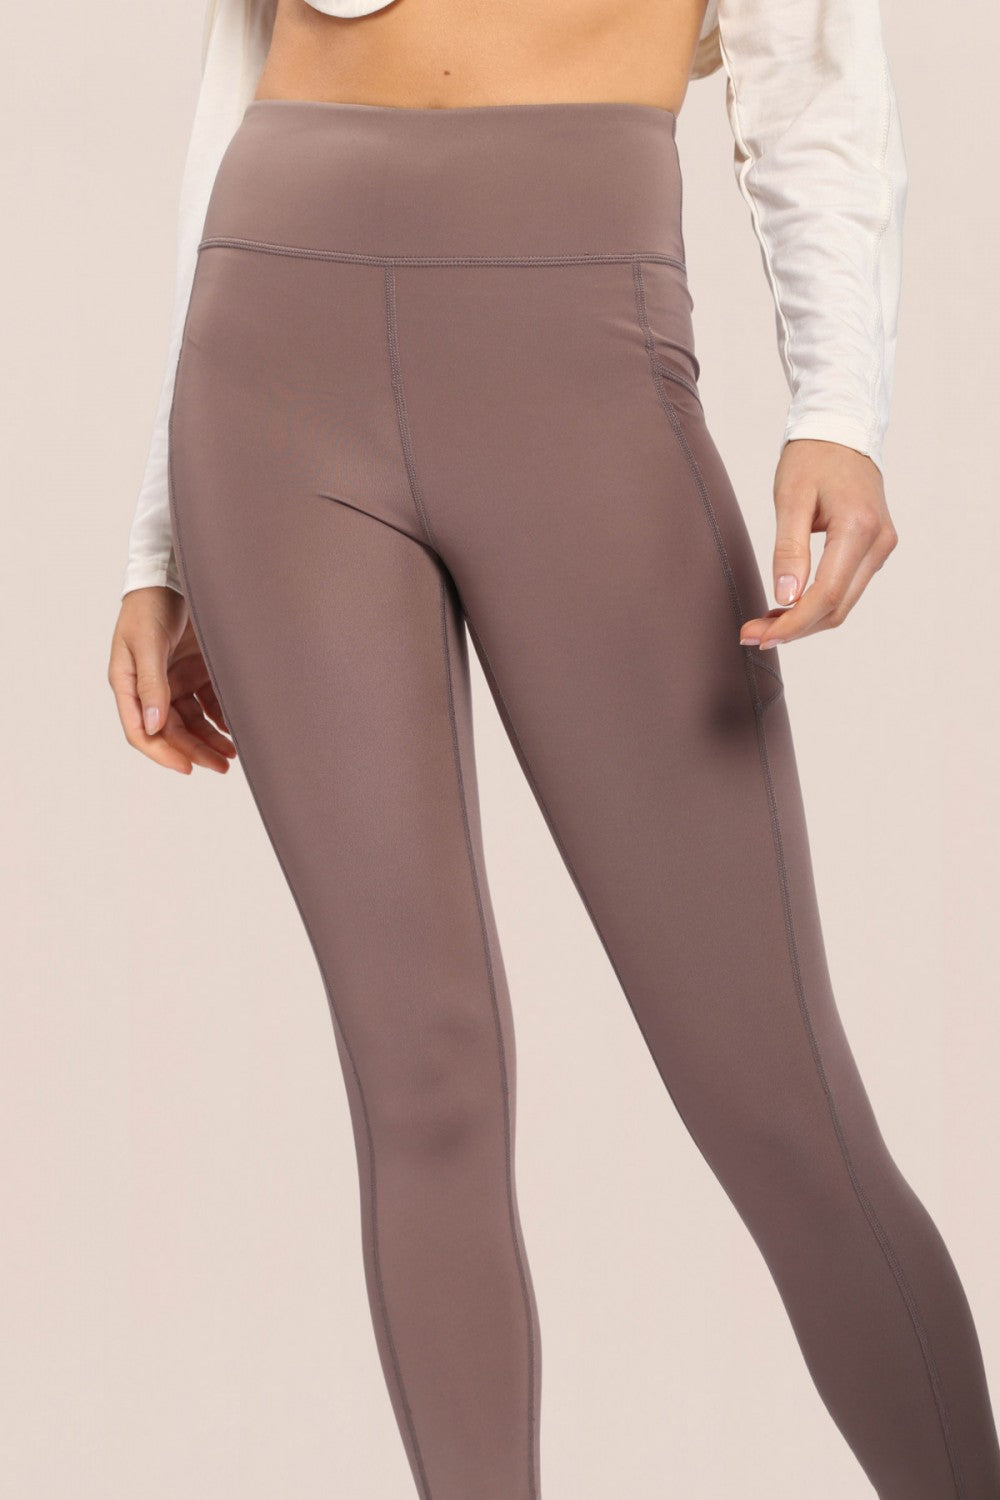 Chocolate Highwaisted Foil Leggings With Side Pockets - The Pretty